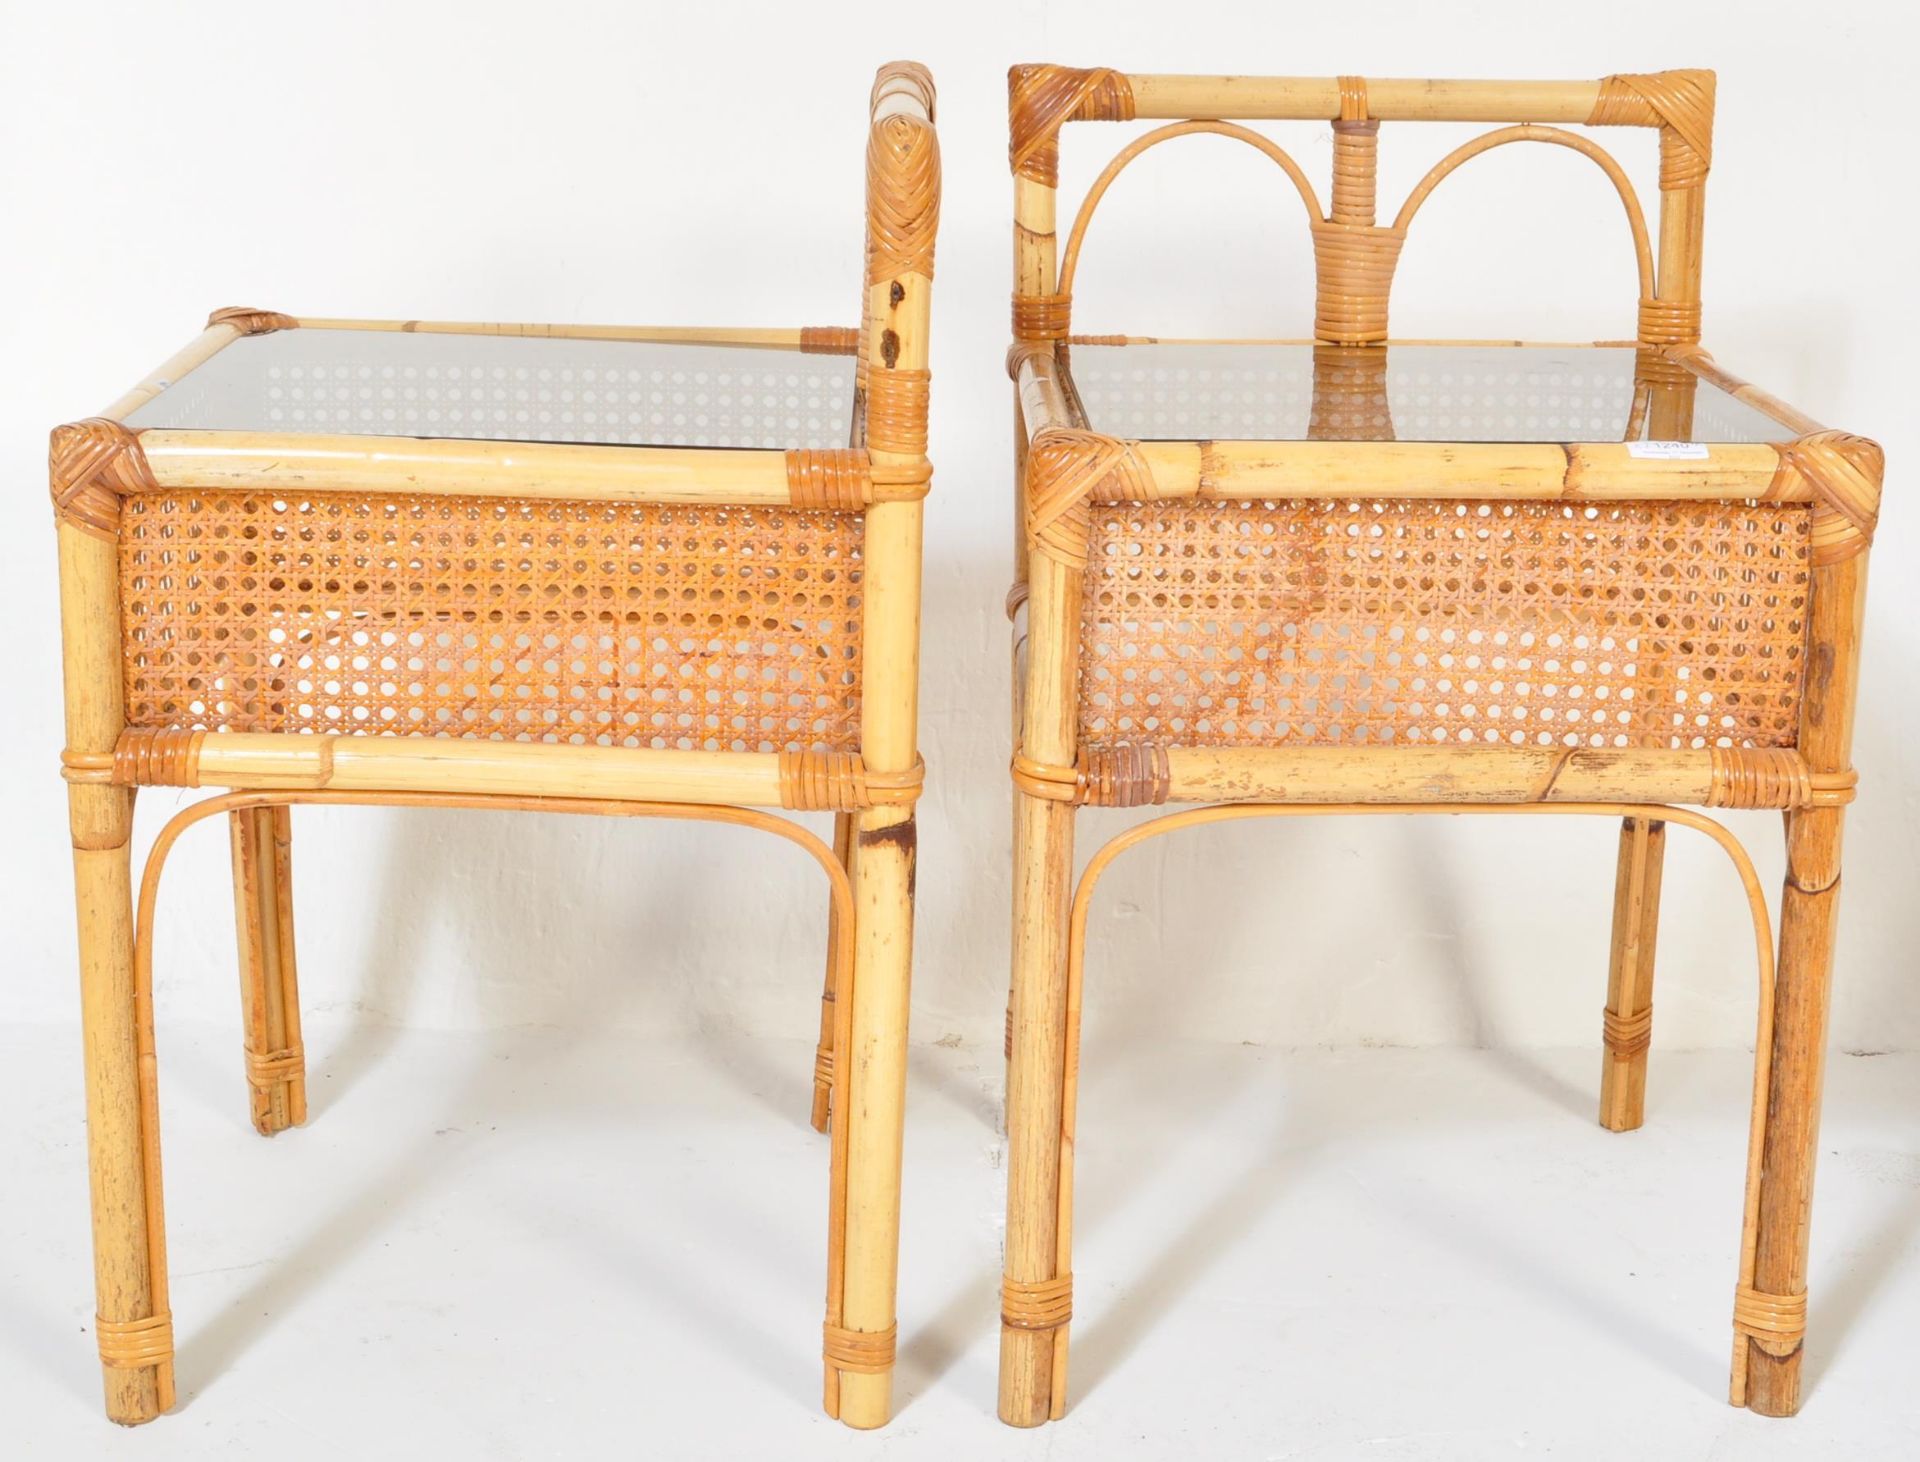 PAIR OF RETRO VINTAGE BAMBOO RATTAN BEDSIDE TABLES - Image 5 of 5